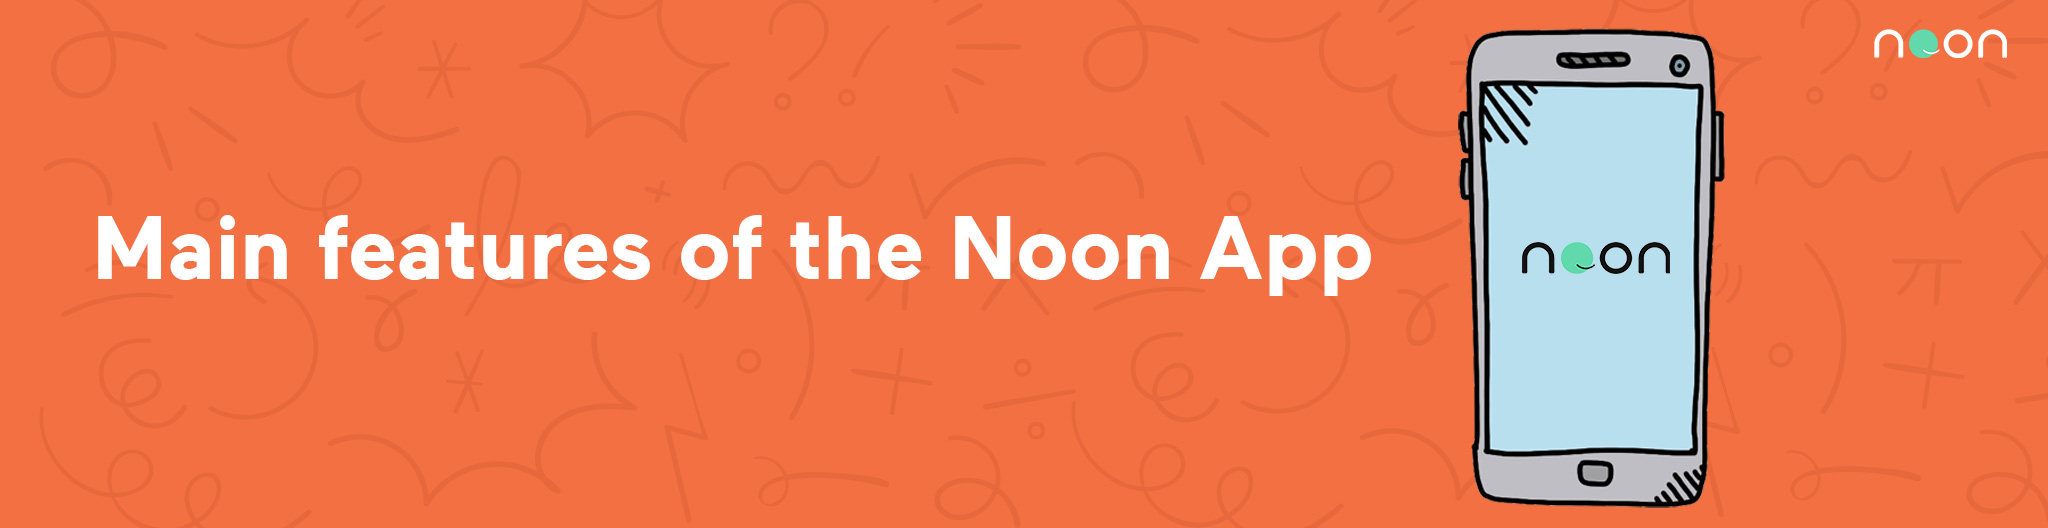 Main features of the Noon App